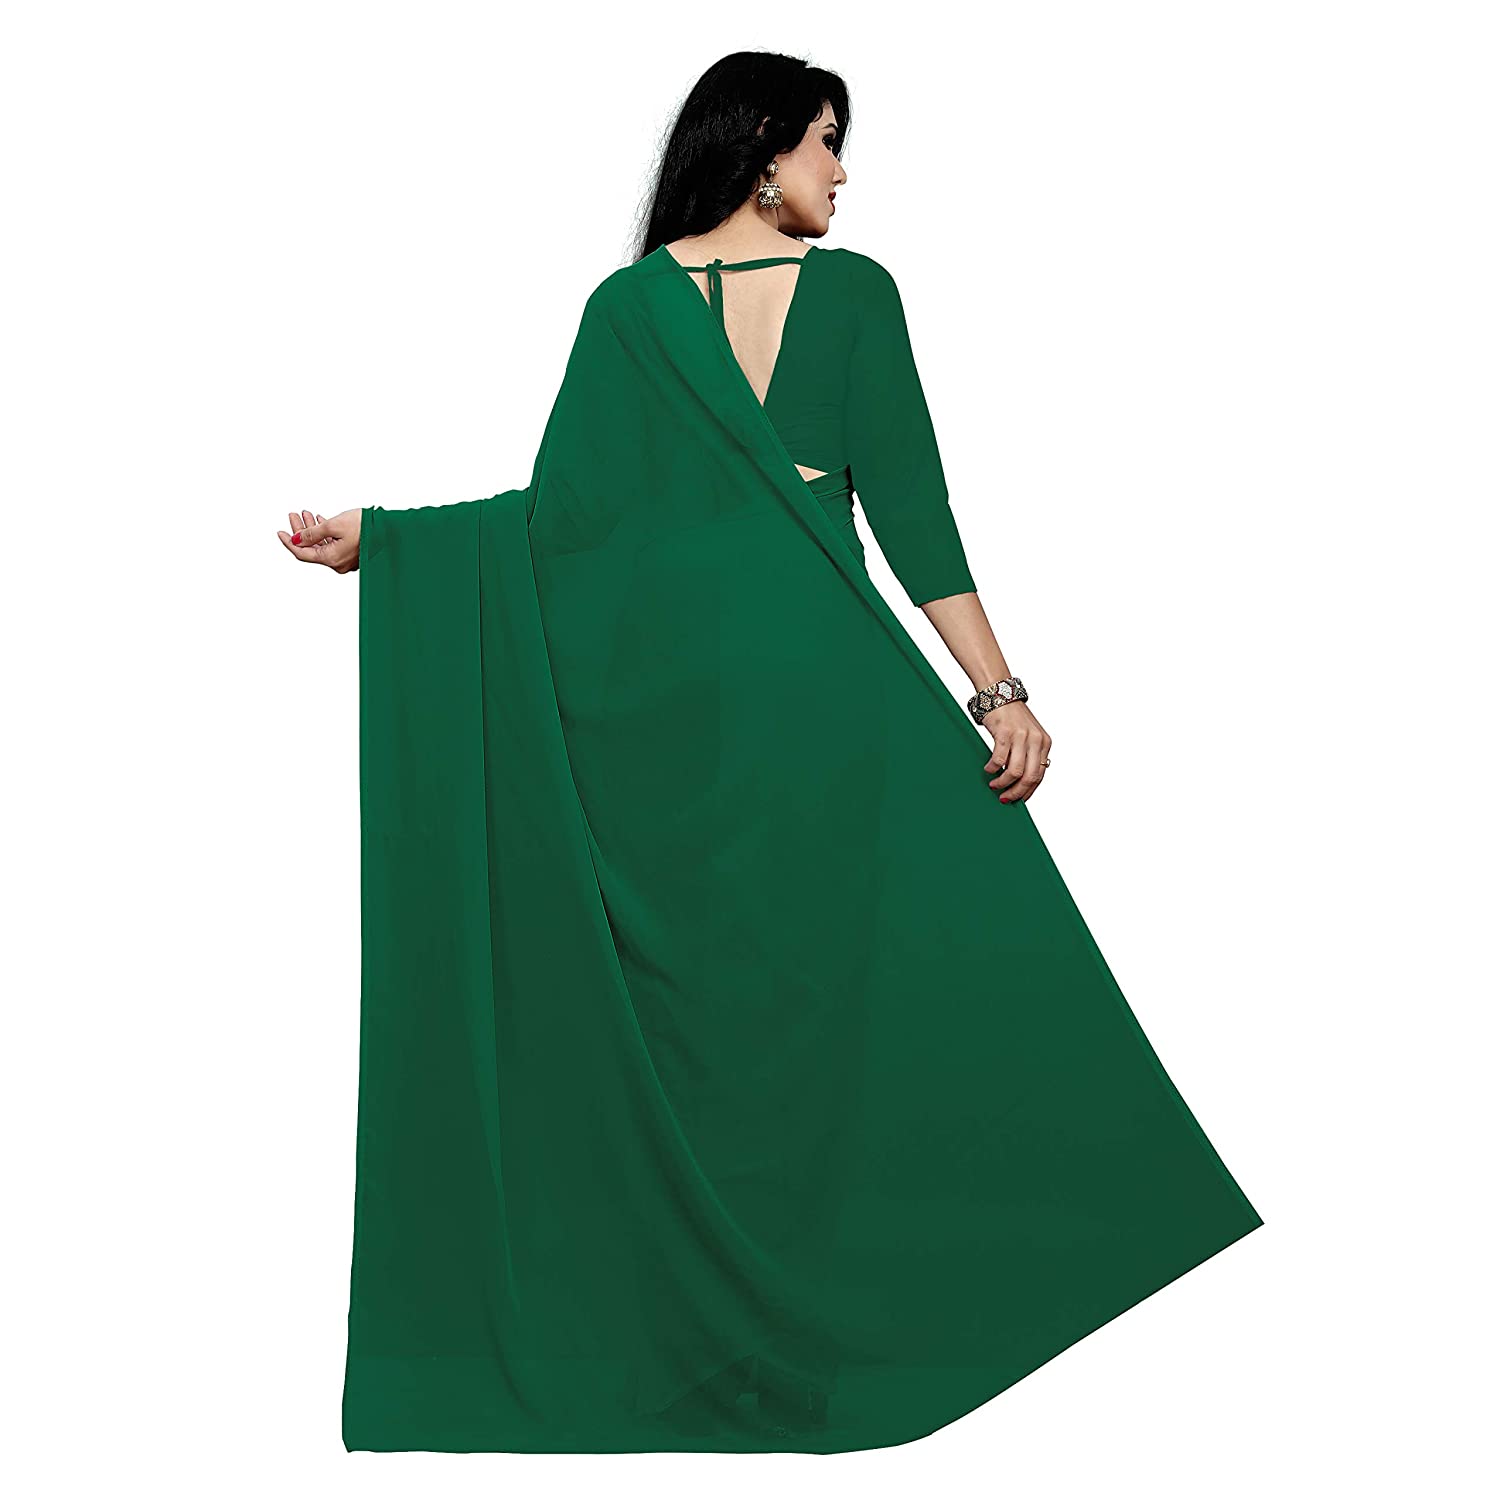 Women's Plain Woven Daily Wear  Formal Georgette Sari With Blouse Piece (Bottle Green) - NIMIDHYA